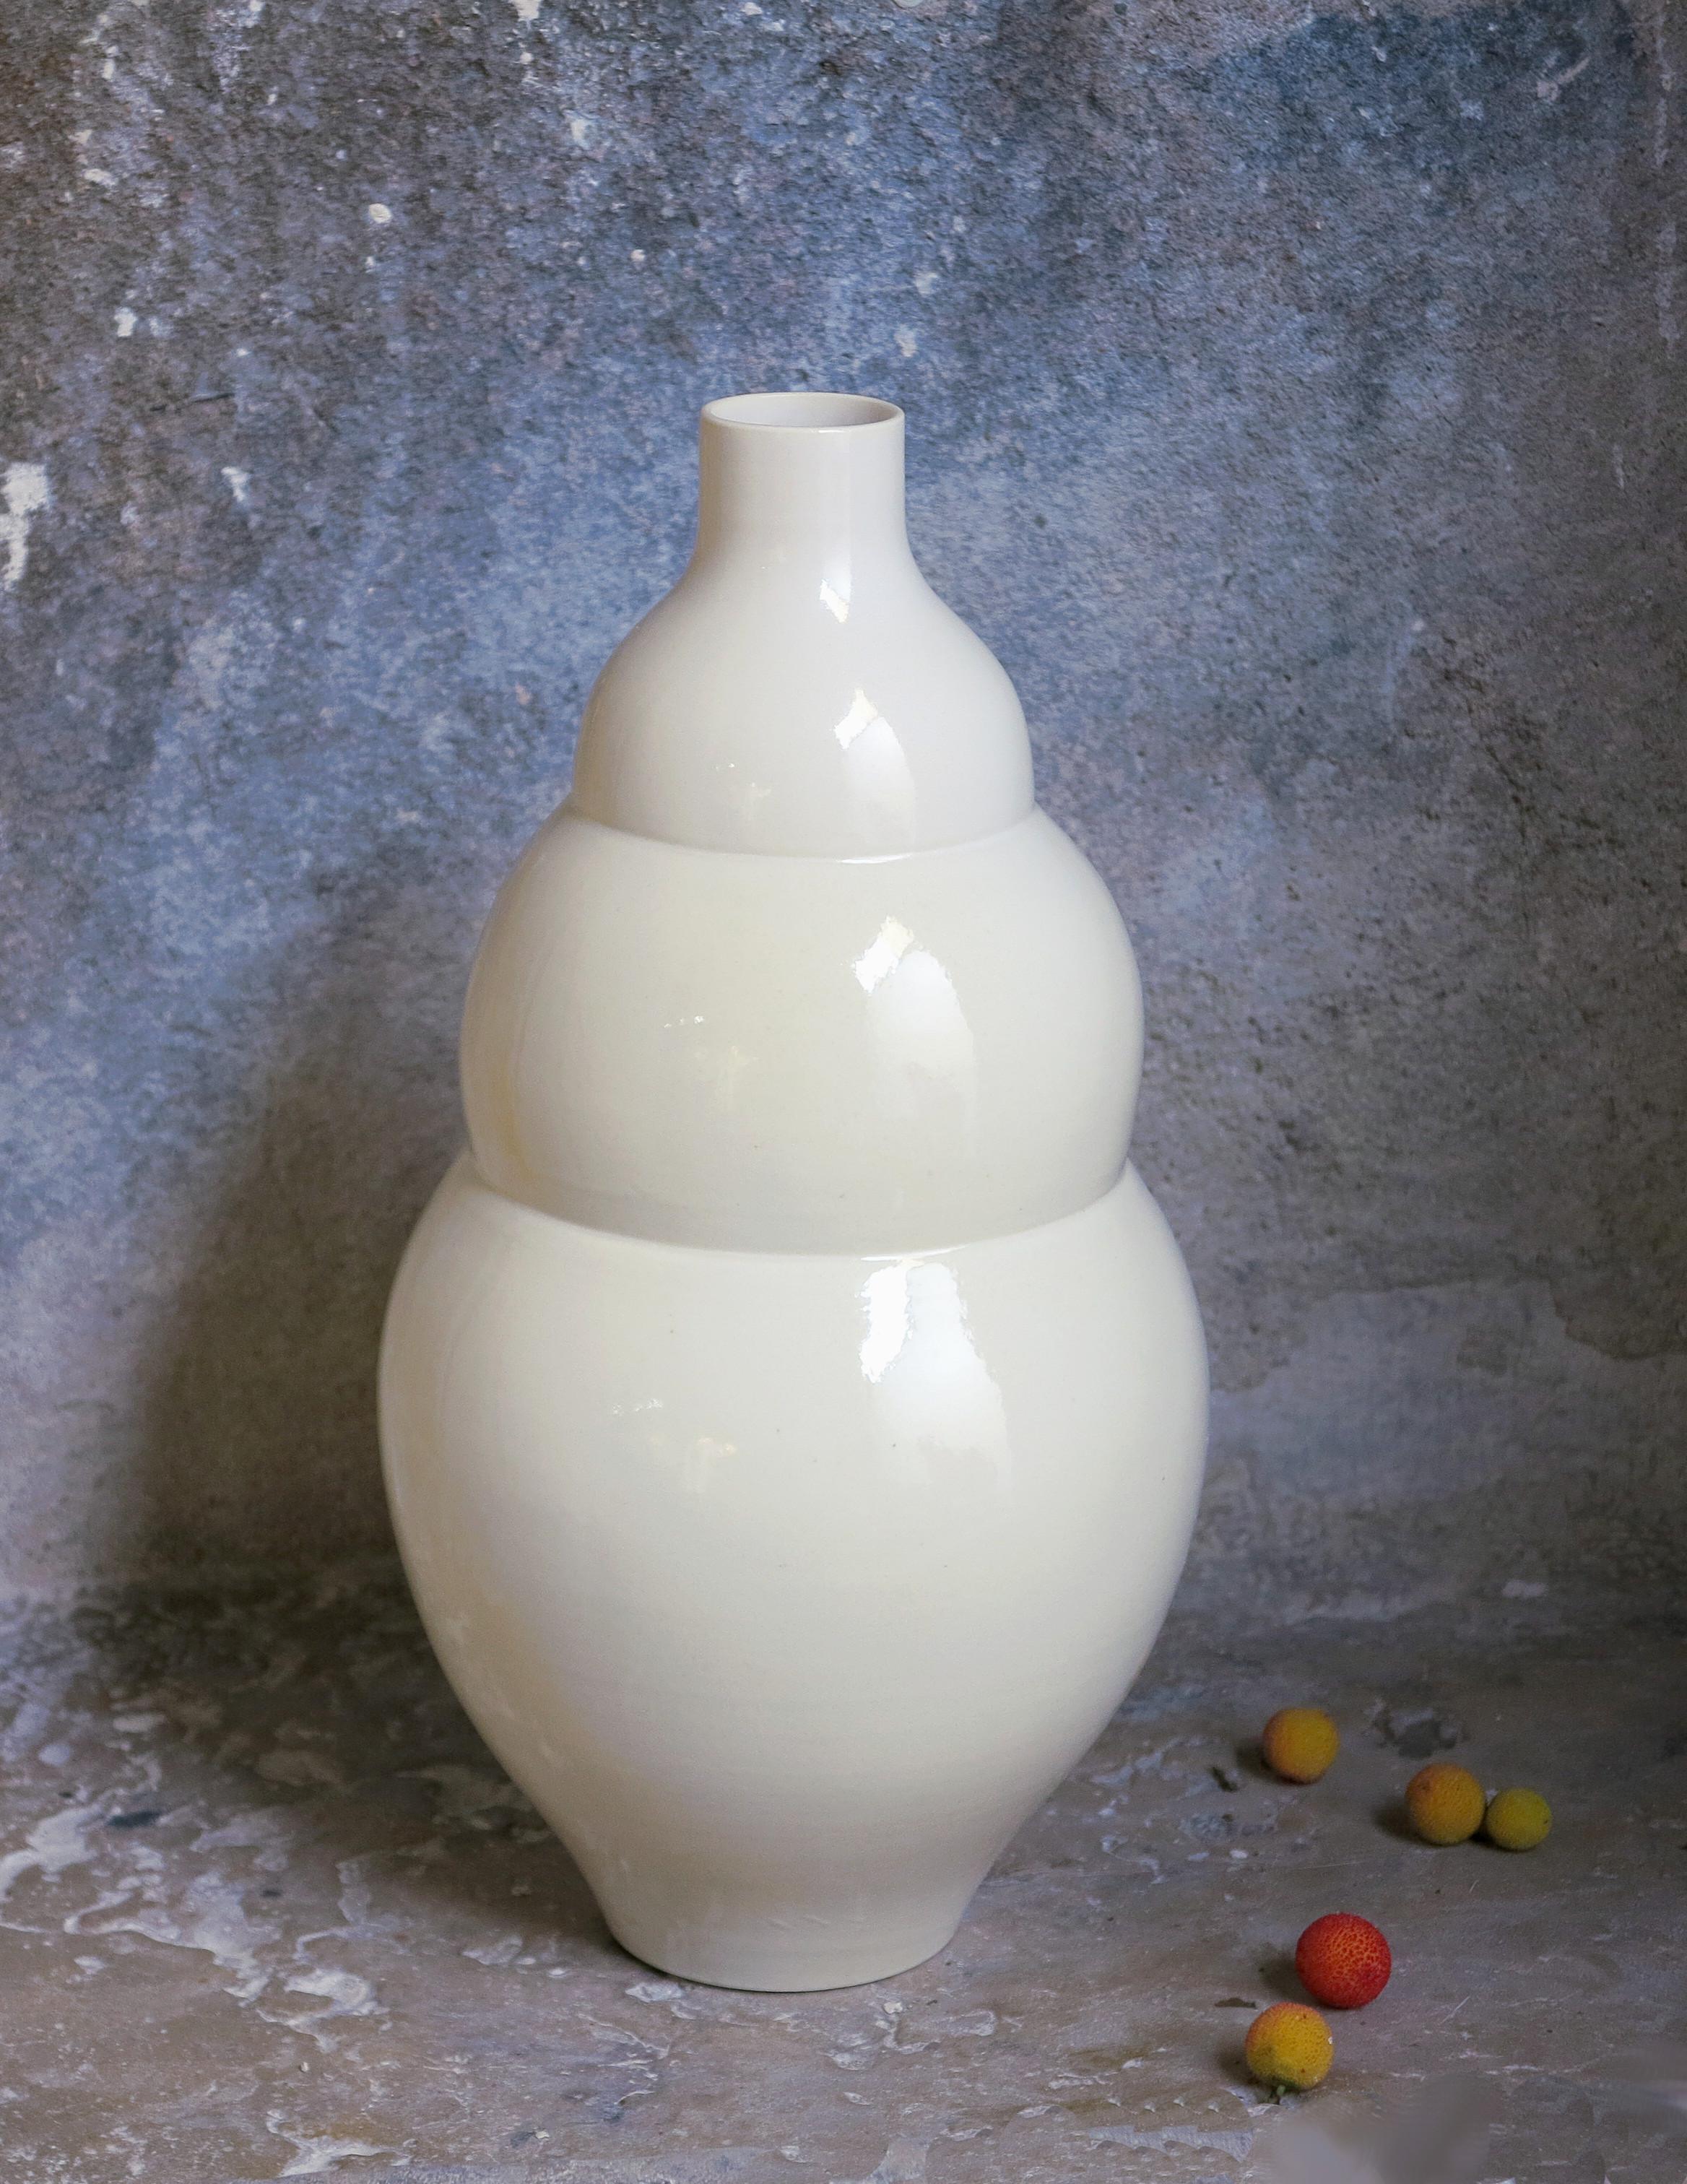 Grand vase blanc by Cica Gomez
Dimensions: Ø 16 x H 35 cm
Materials: Porcelain


Usual objects. My work is first driven by the search for the line. The one that it draw when the object takes shape and place in space. That which delimits a